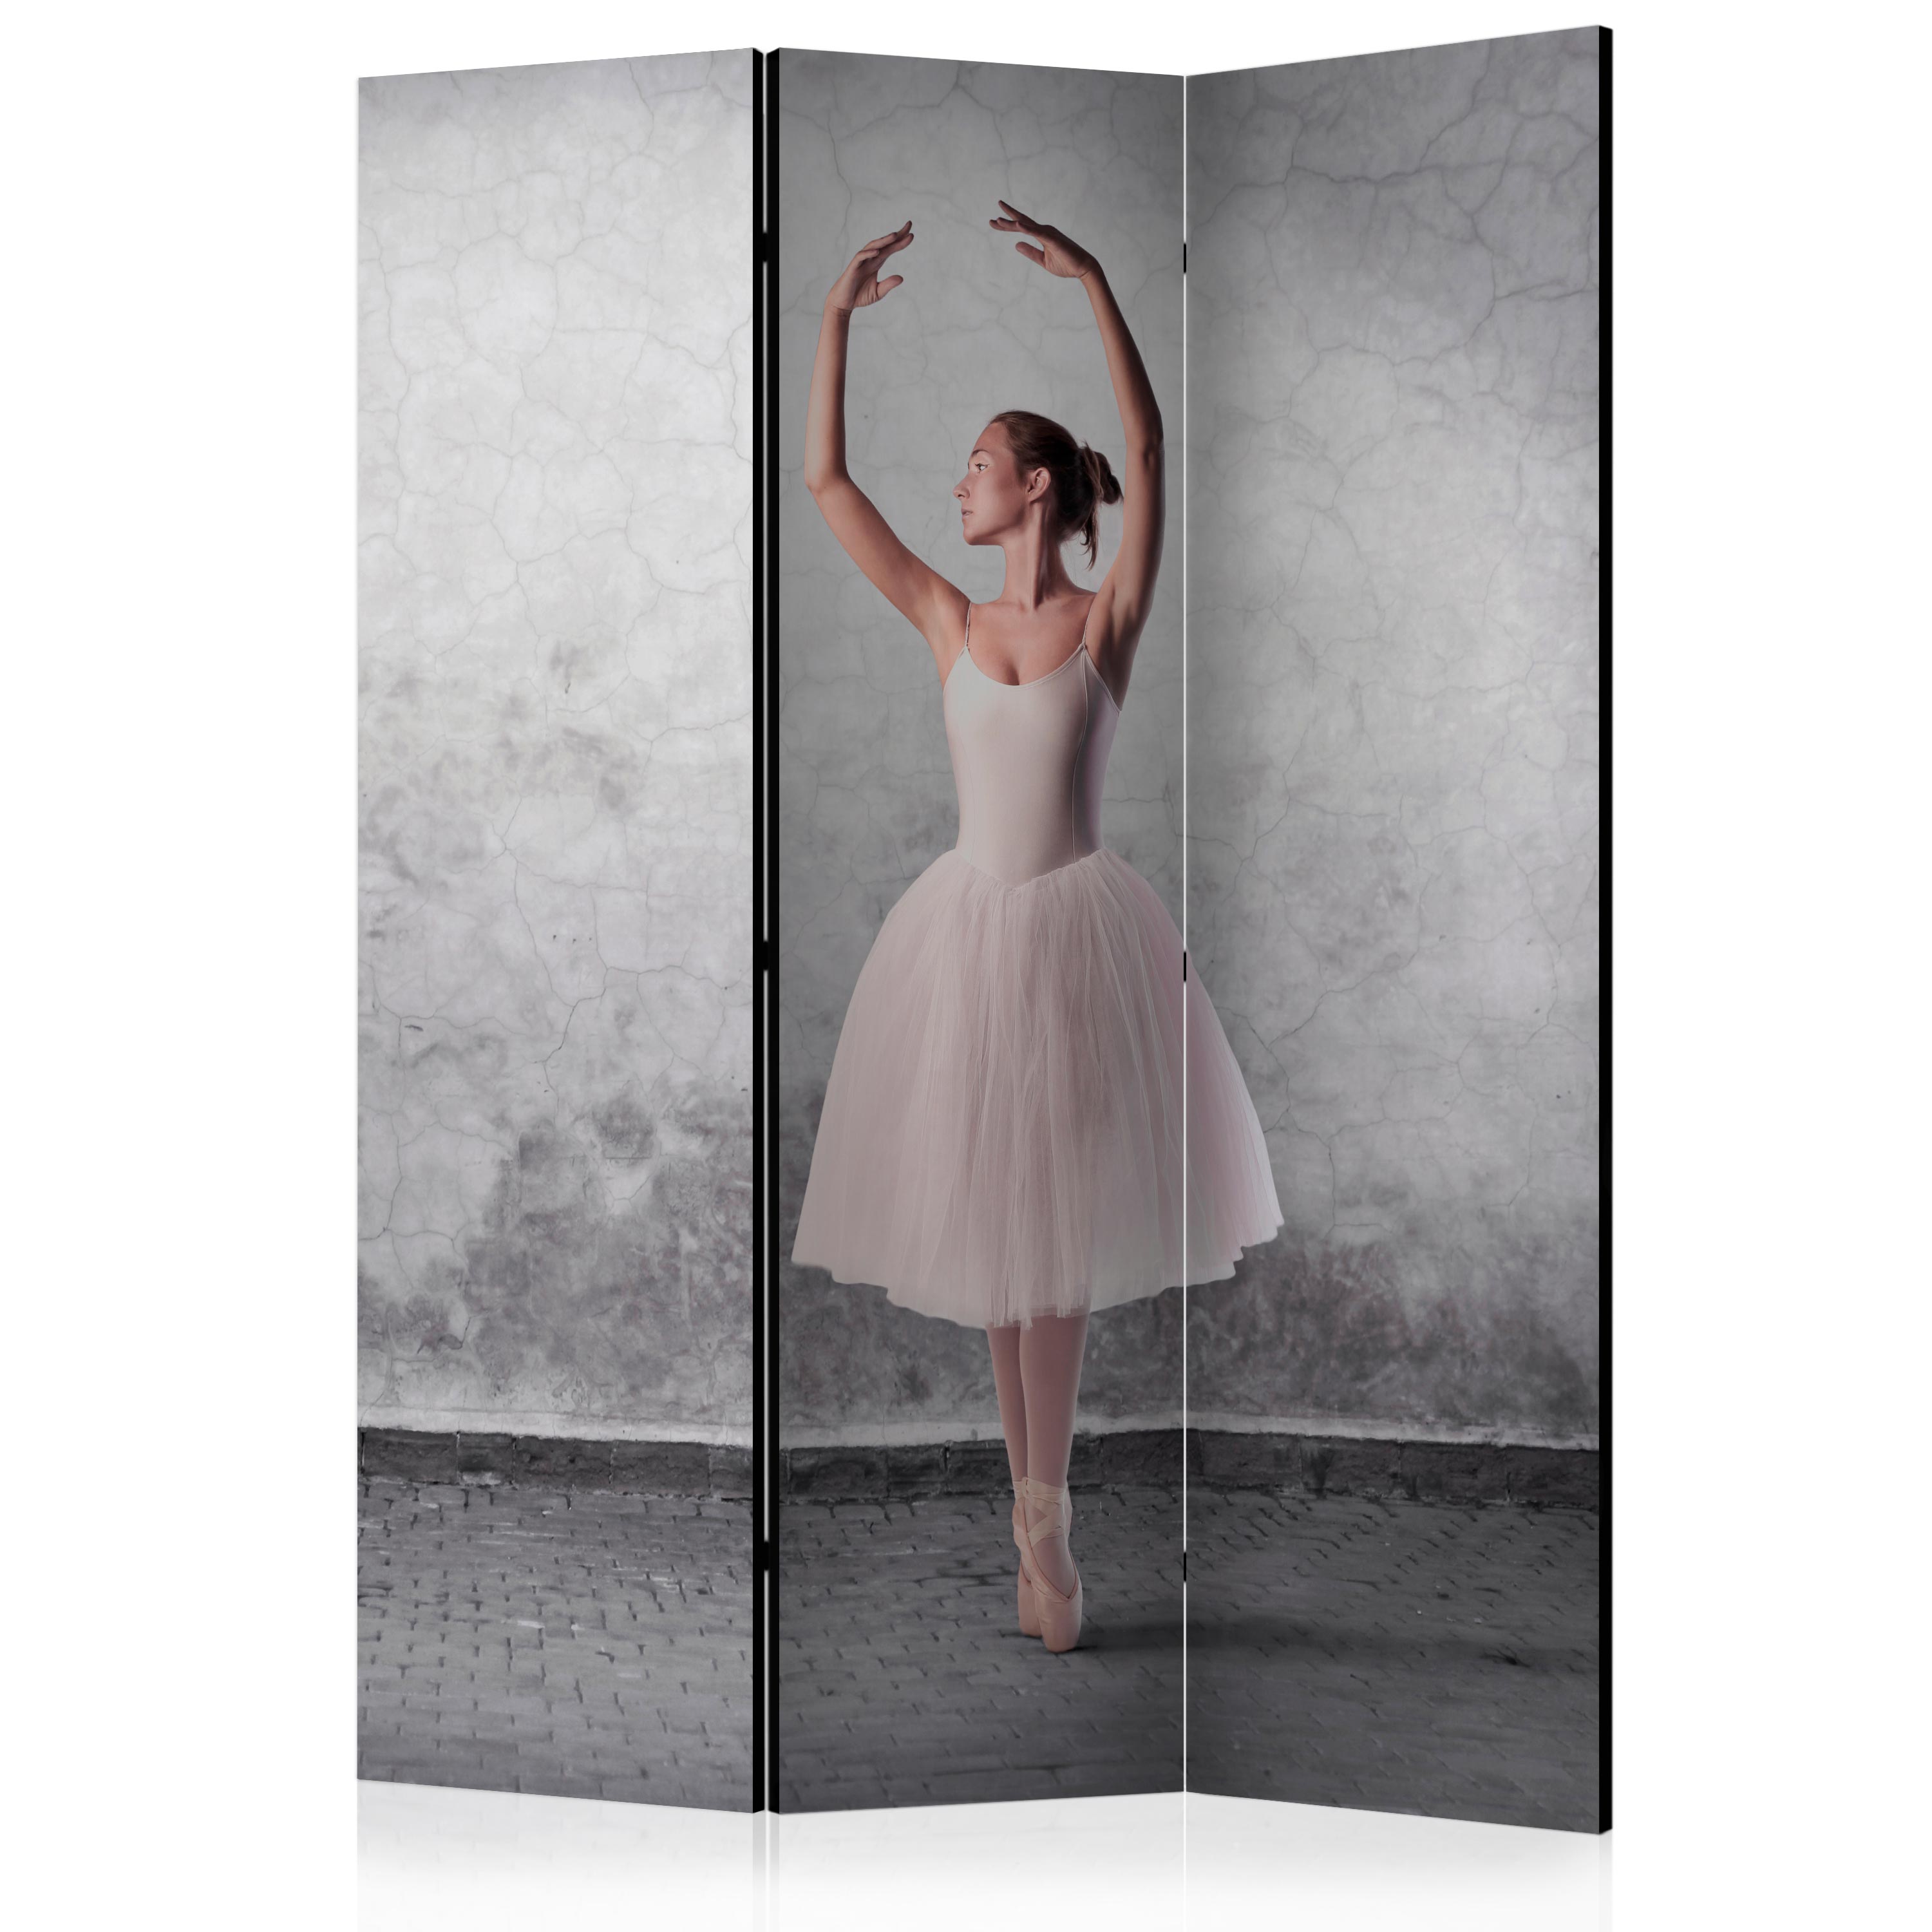 Room Divider - Ballerina in Degas paintings style [Room Dividers] - 135x172